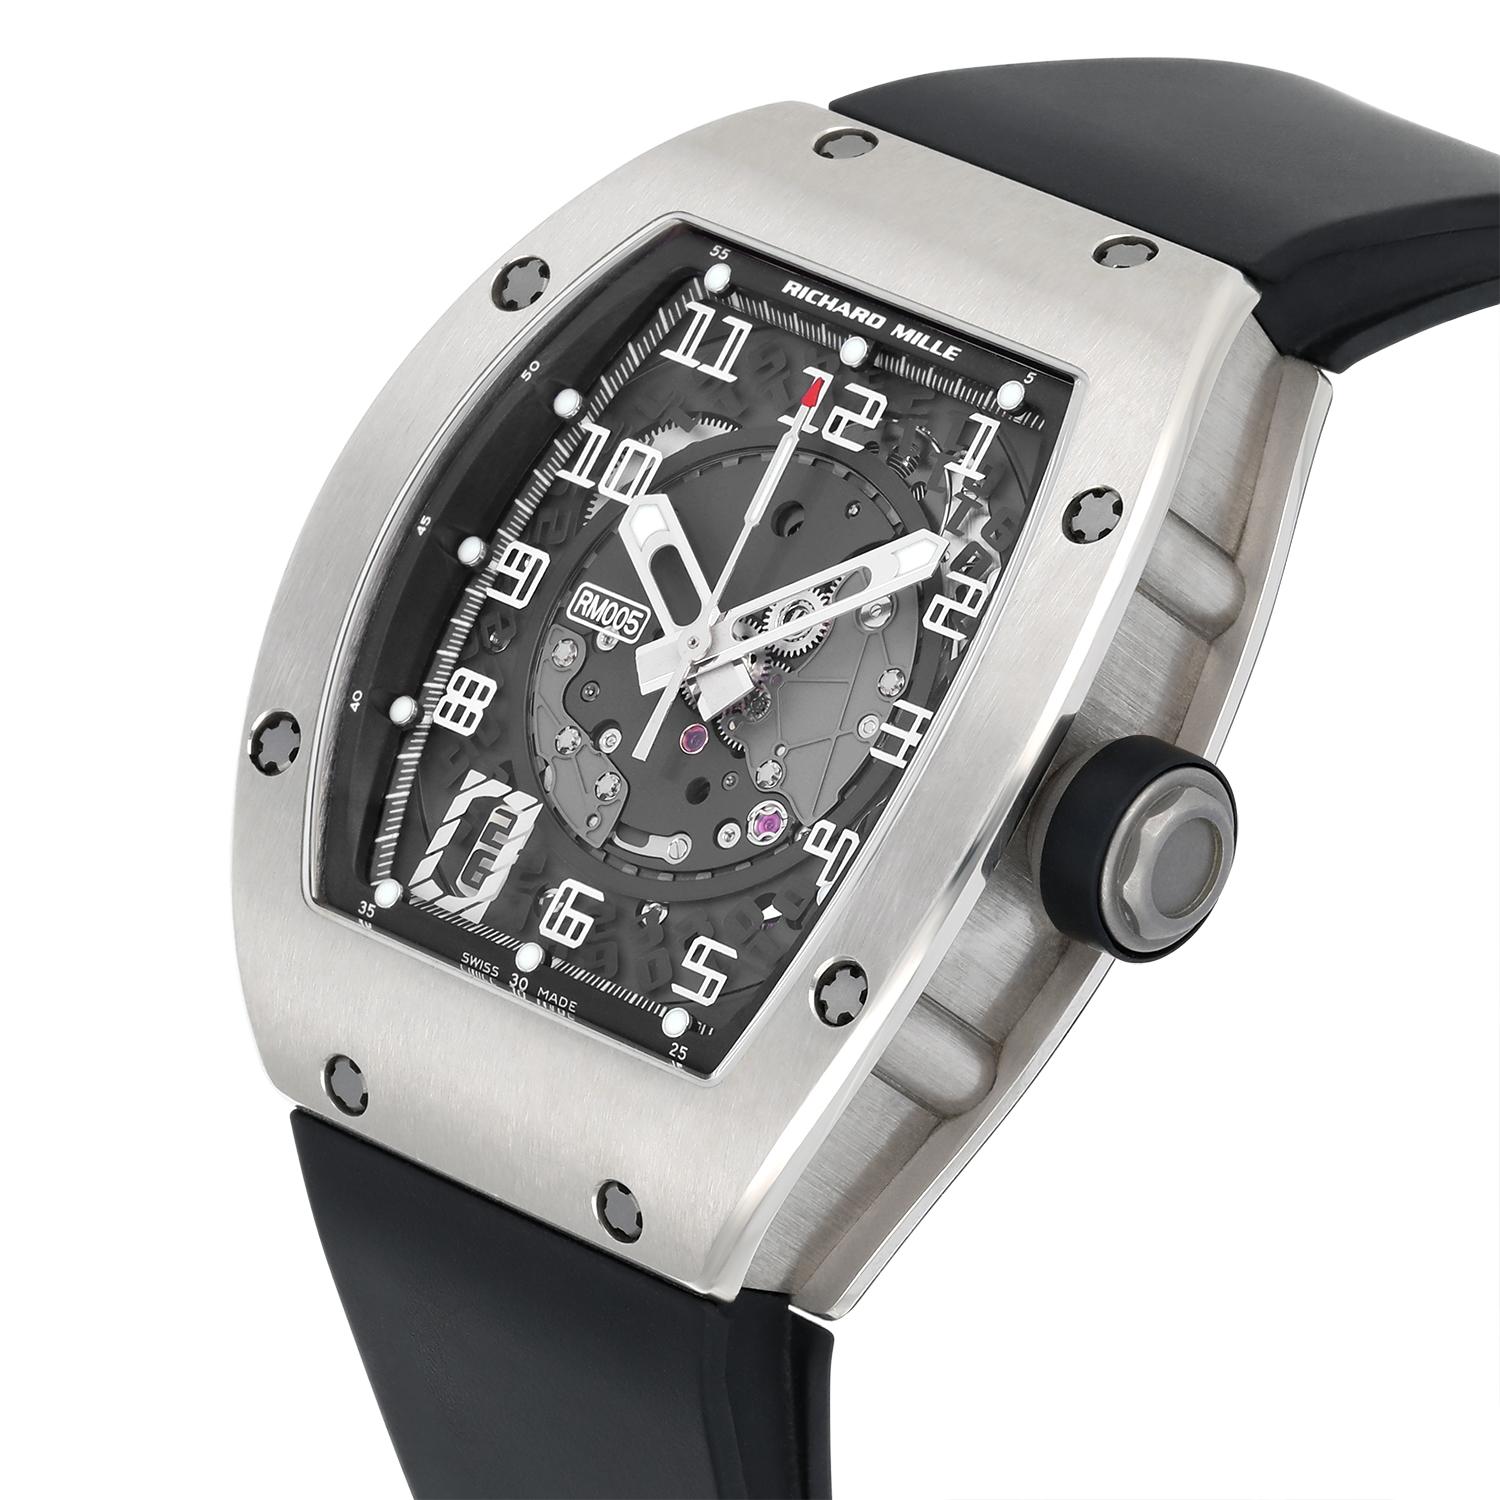 Modern Richard Mille RM 005 Manual Wind White Gold Mens Watch Rubber Band Complete For Sale